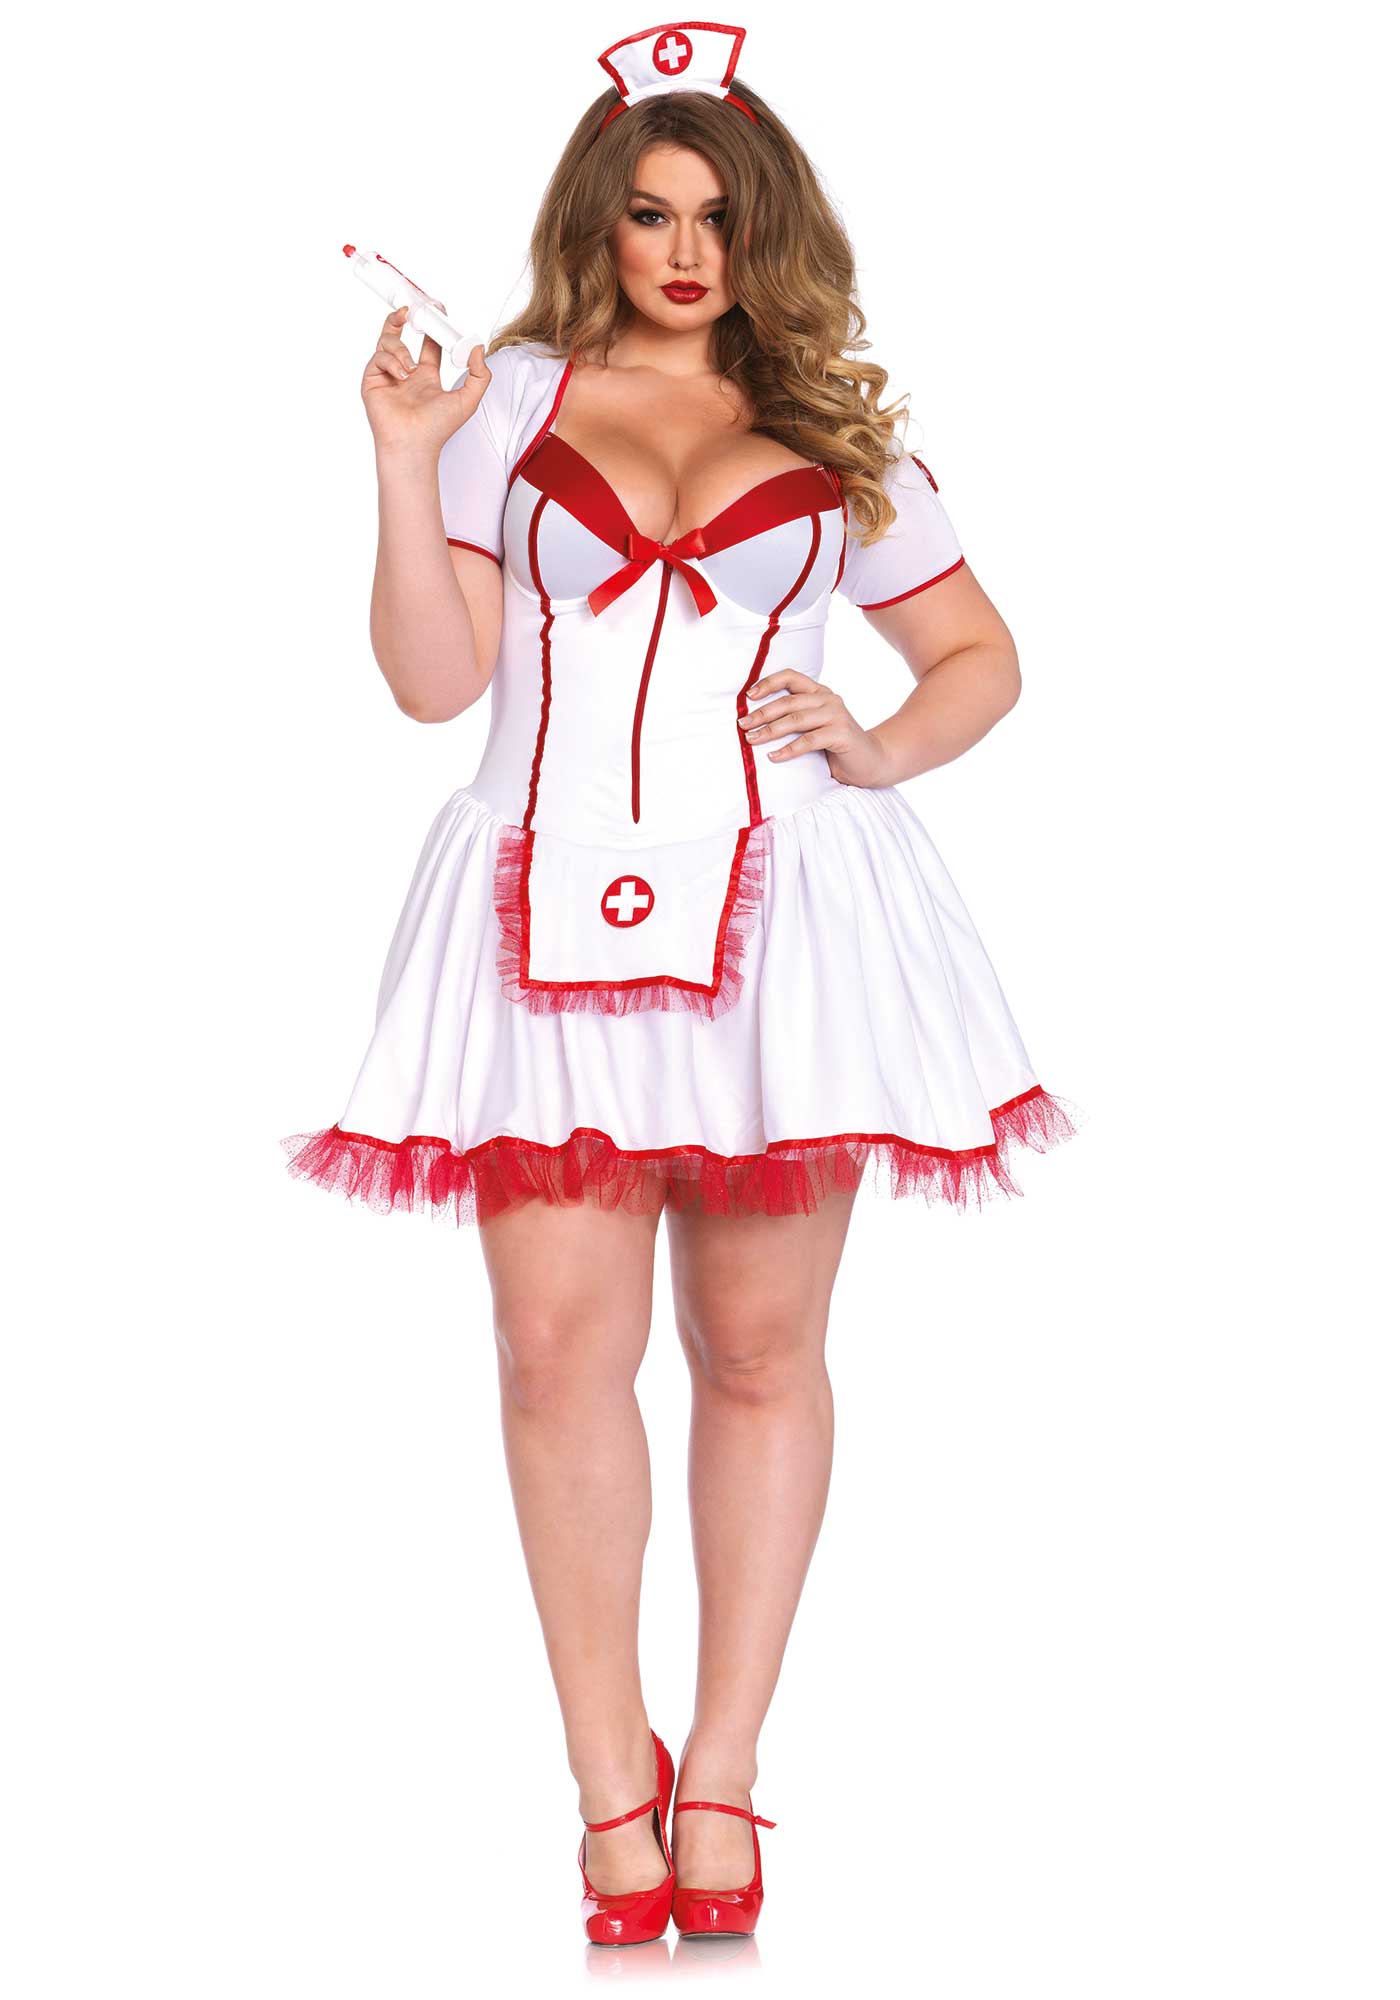 Curvy Nurse Costume includes a Body hugging shaper dress with molded underw...